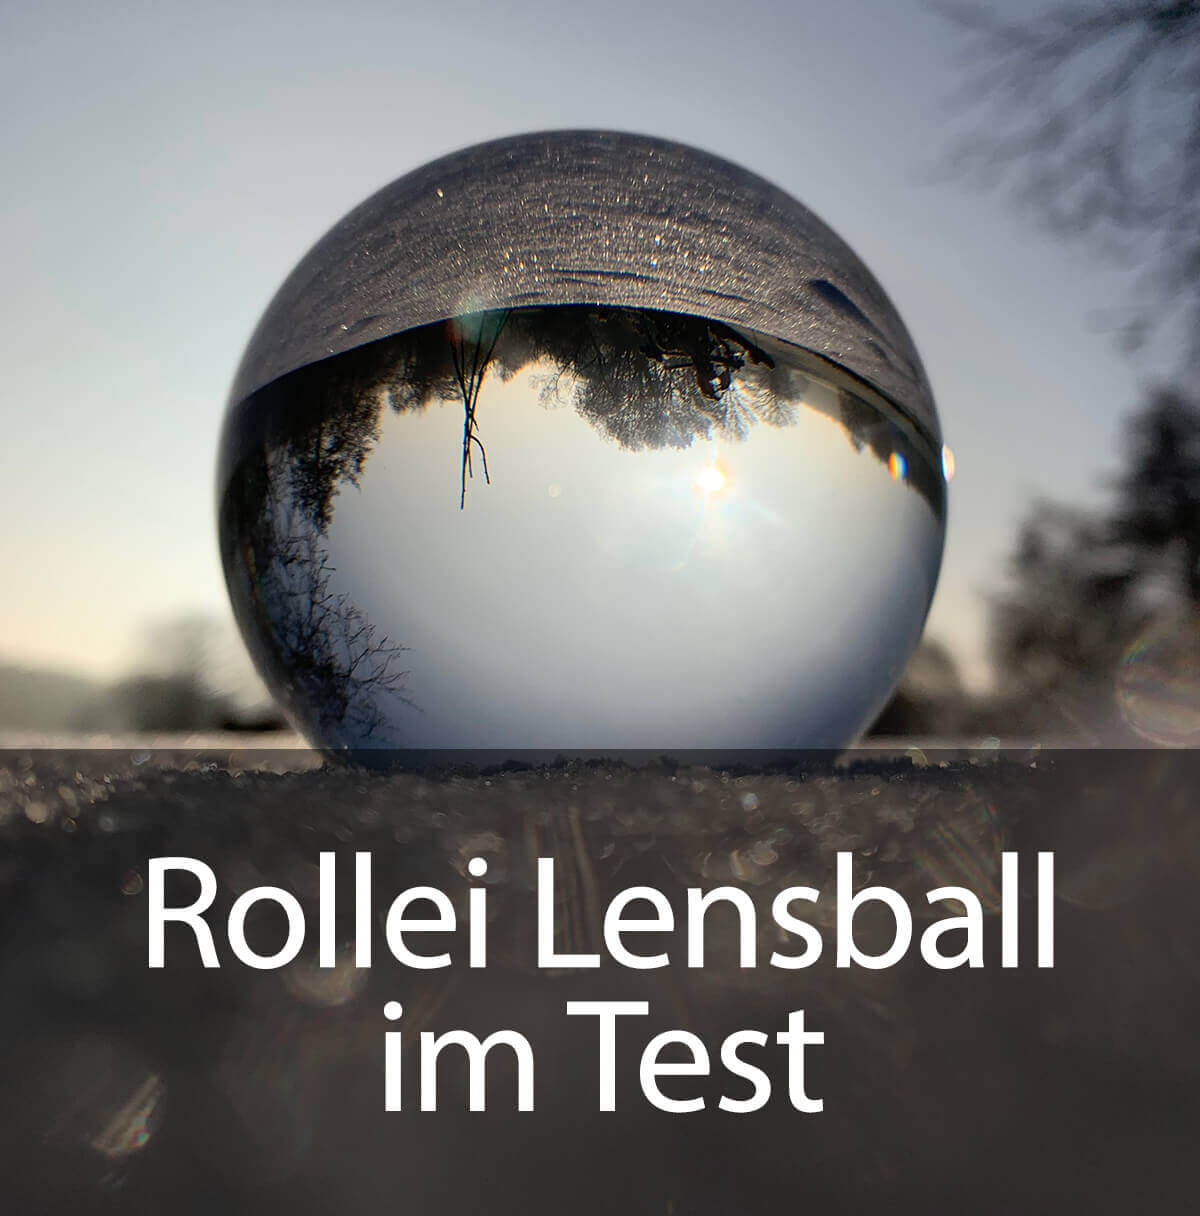 In the test: the Rollei lens ball with 90 mm